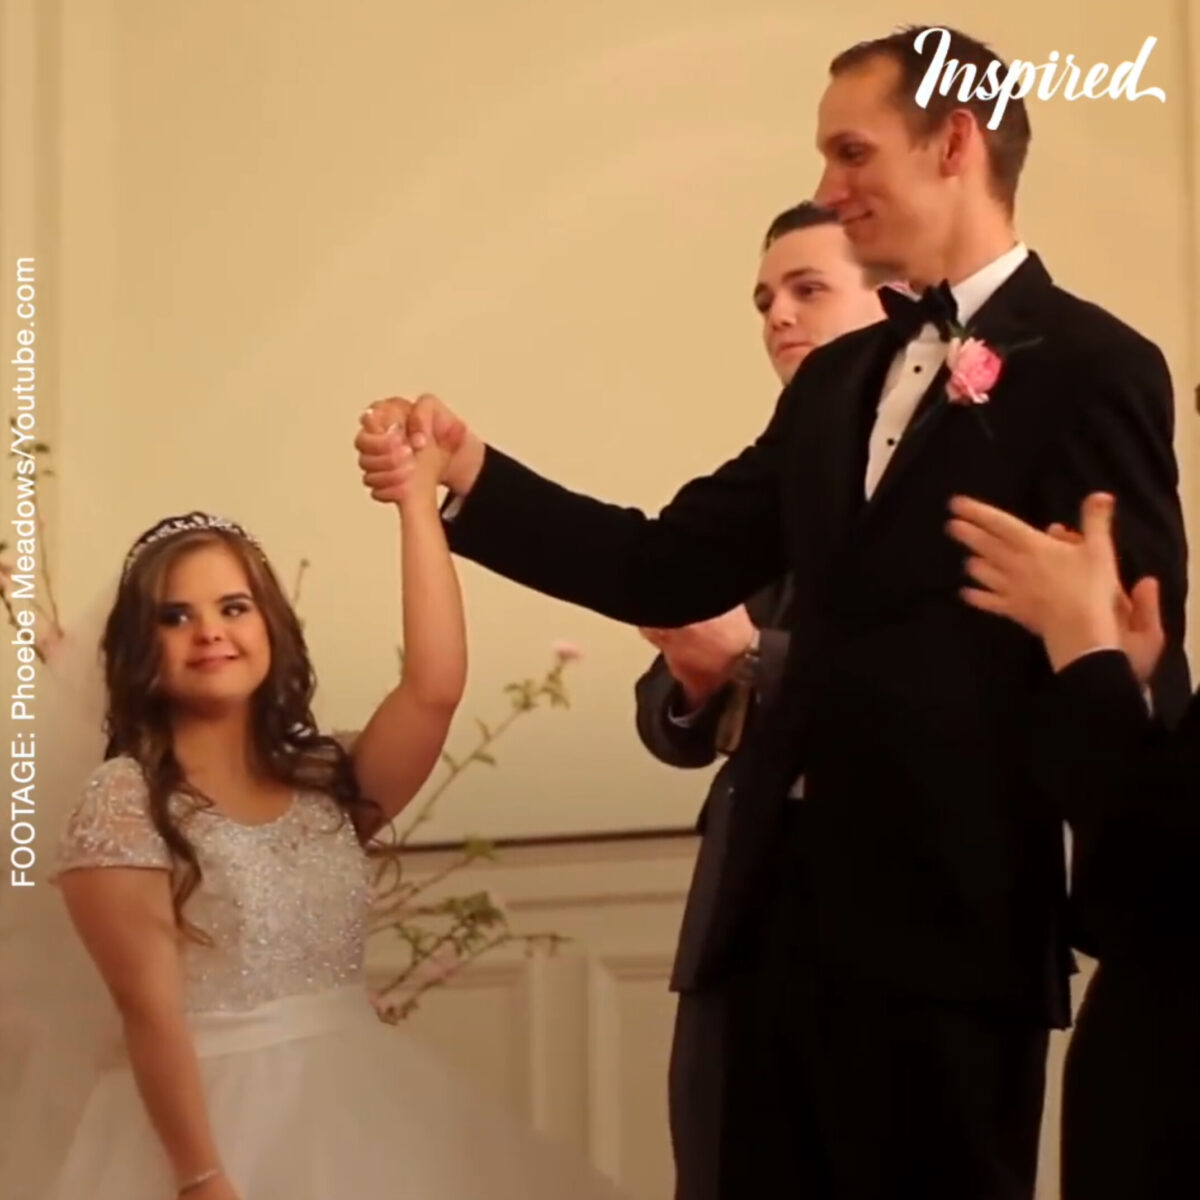 Couple With Down Syndrome And Learning Differences Get Married